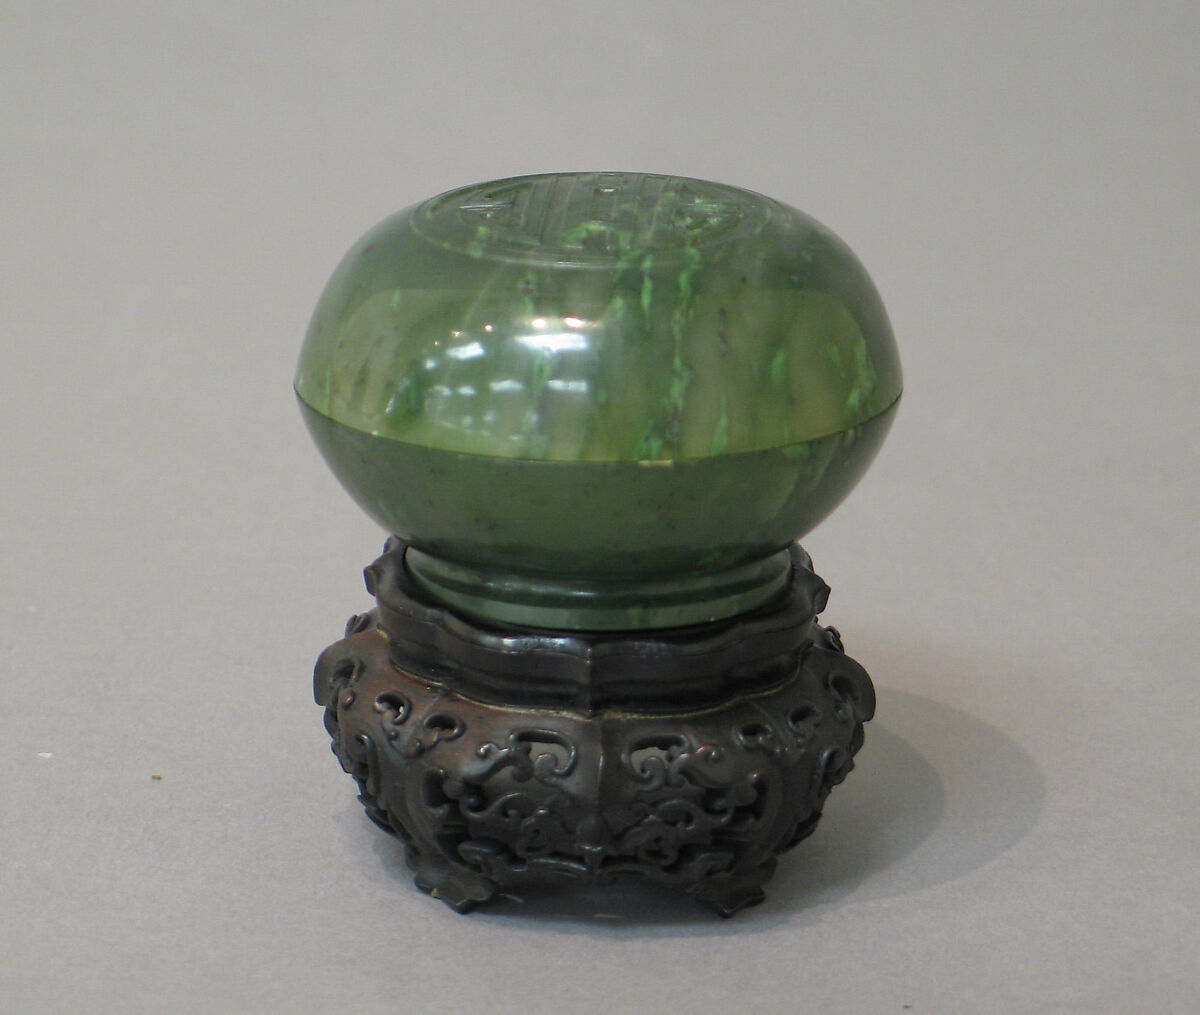 Box with cover, Nephrite, dark olive-green, translucent, and mottled by lighter shades, China 